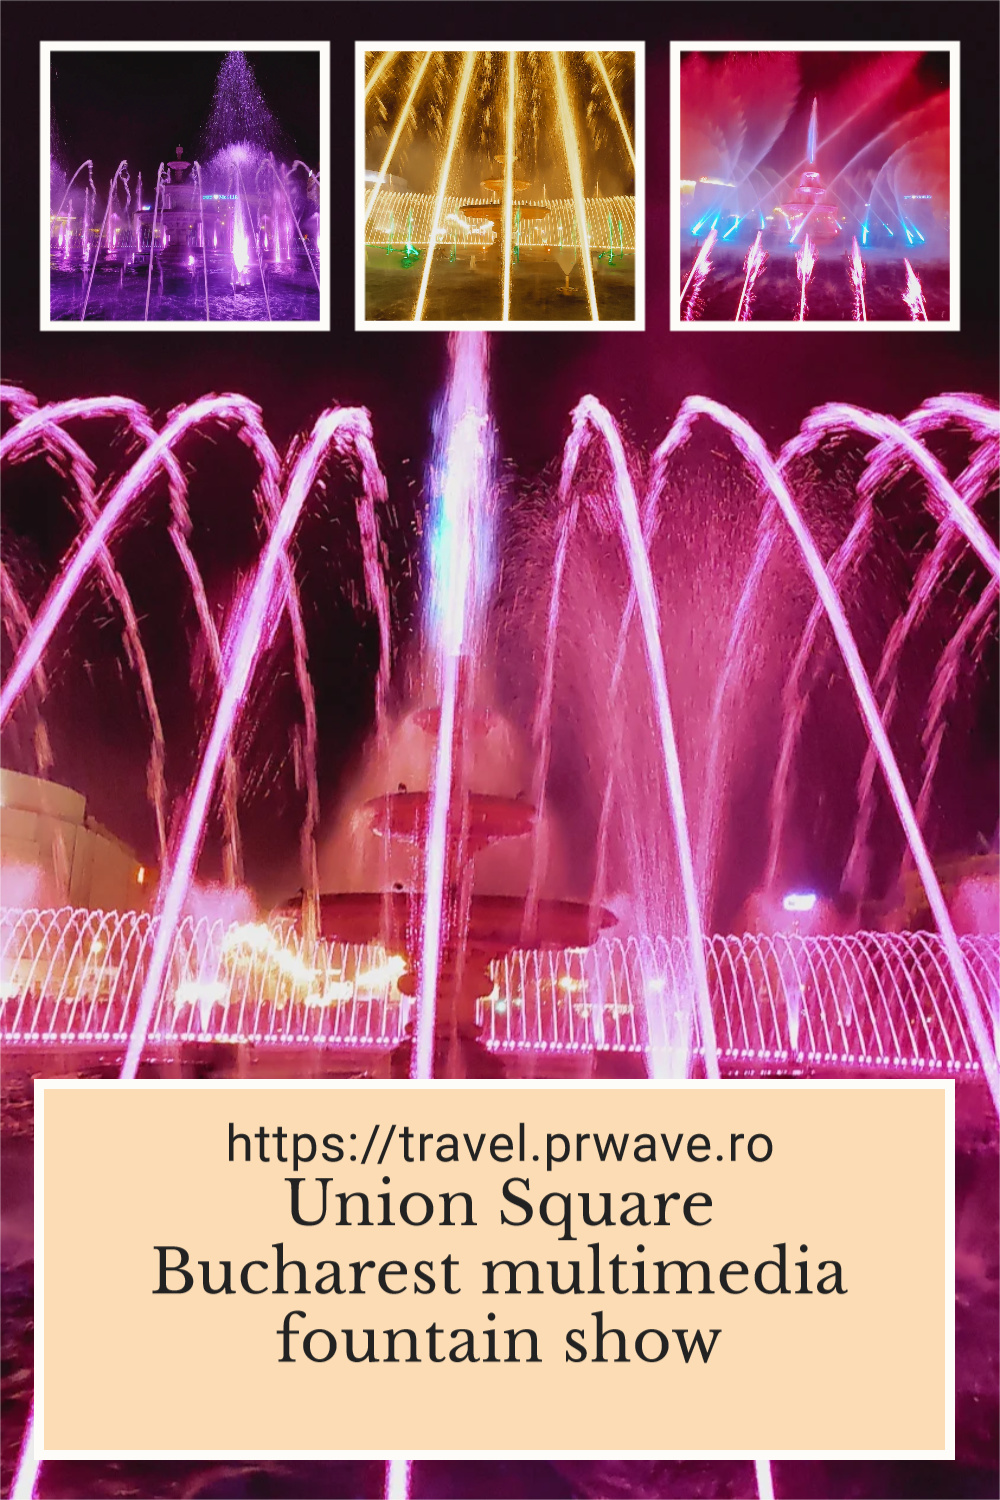 Union Square Bucharest fountain show find out everything you need to know about Piata Unirii multimedia fountain show (videos included). Discover this magical singing fountains show in Bucharest, Romania. #fountainshow #magicalshow #singingfountainshow #magicalfountainshow #bucharestfountains #bucharestfountainsshow